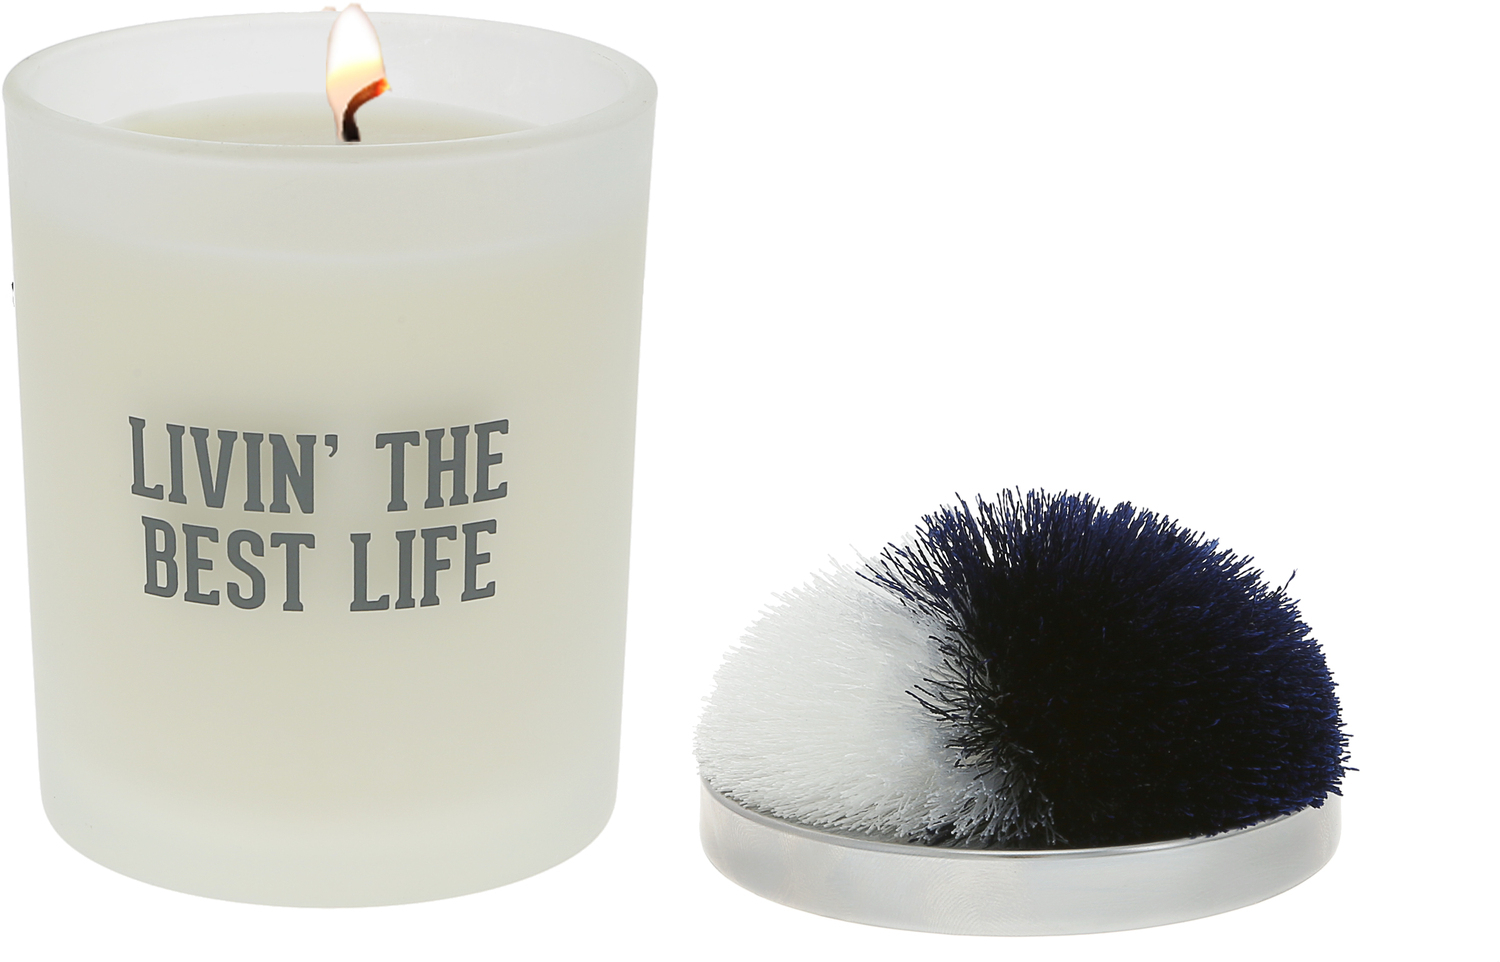 Best Life - Navy & White by Repre-Scent - Best Life - Navy & White - 5.5 oz - 100% Soy Wax Candle with Pom Pom Lid
Scent: Tranquility